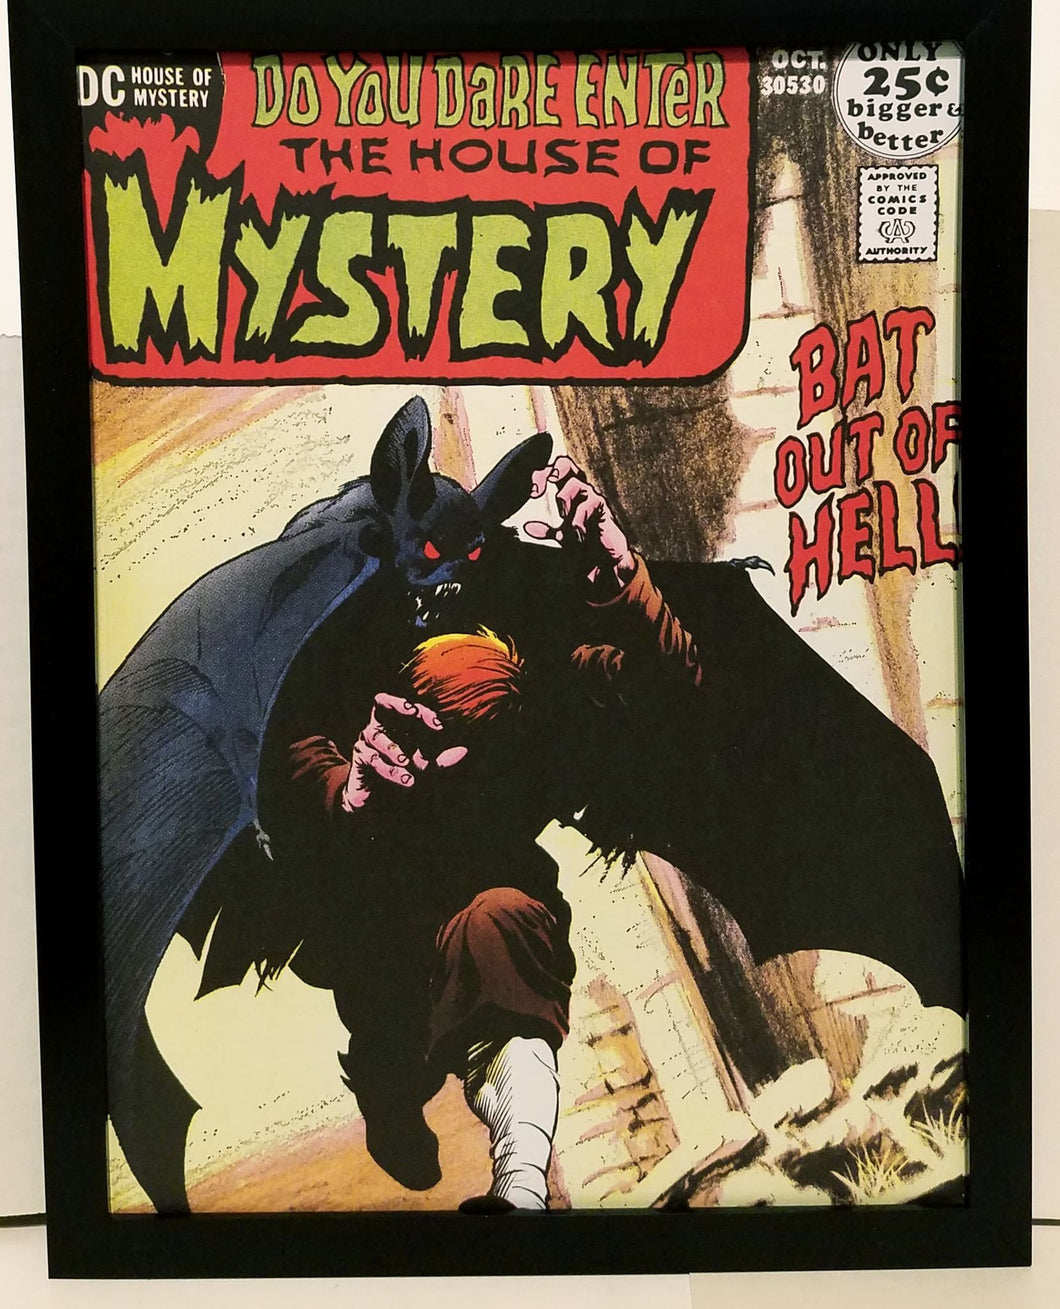 House of Mystery #195 by Bernie Wrightson 9x12 FRAMED DC Comics Art Print Poster